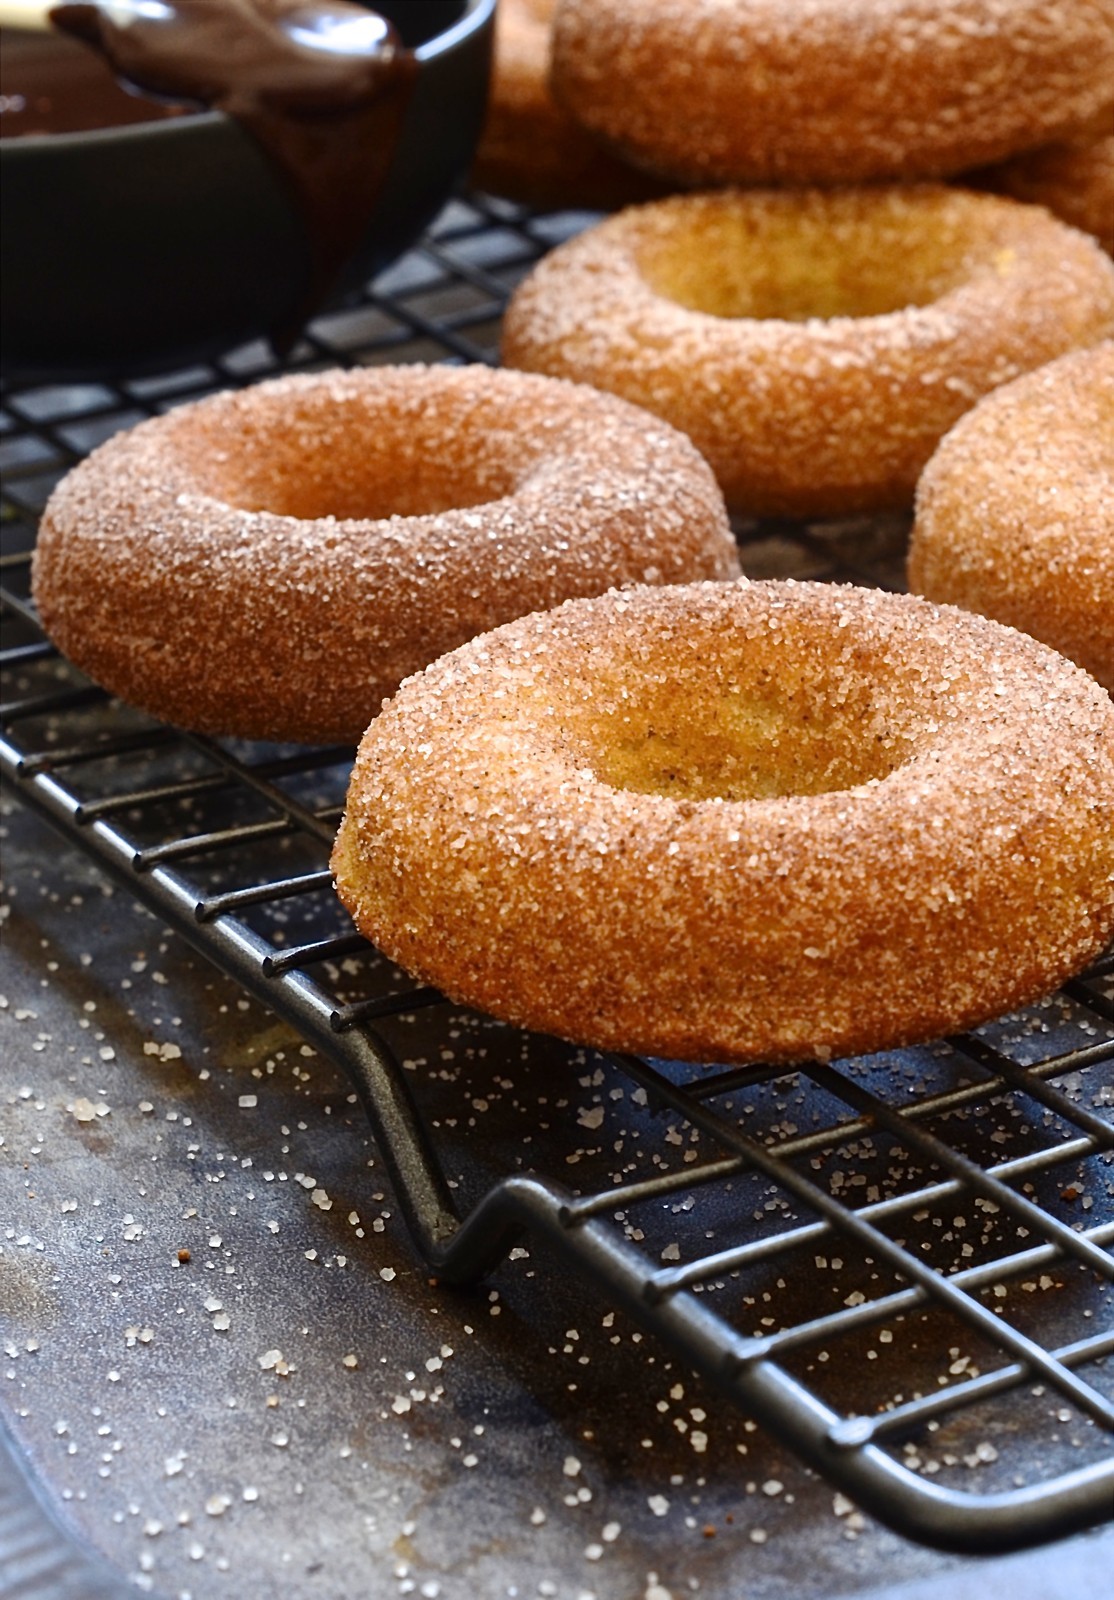 Baked donuts with cinnamon